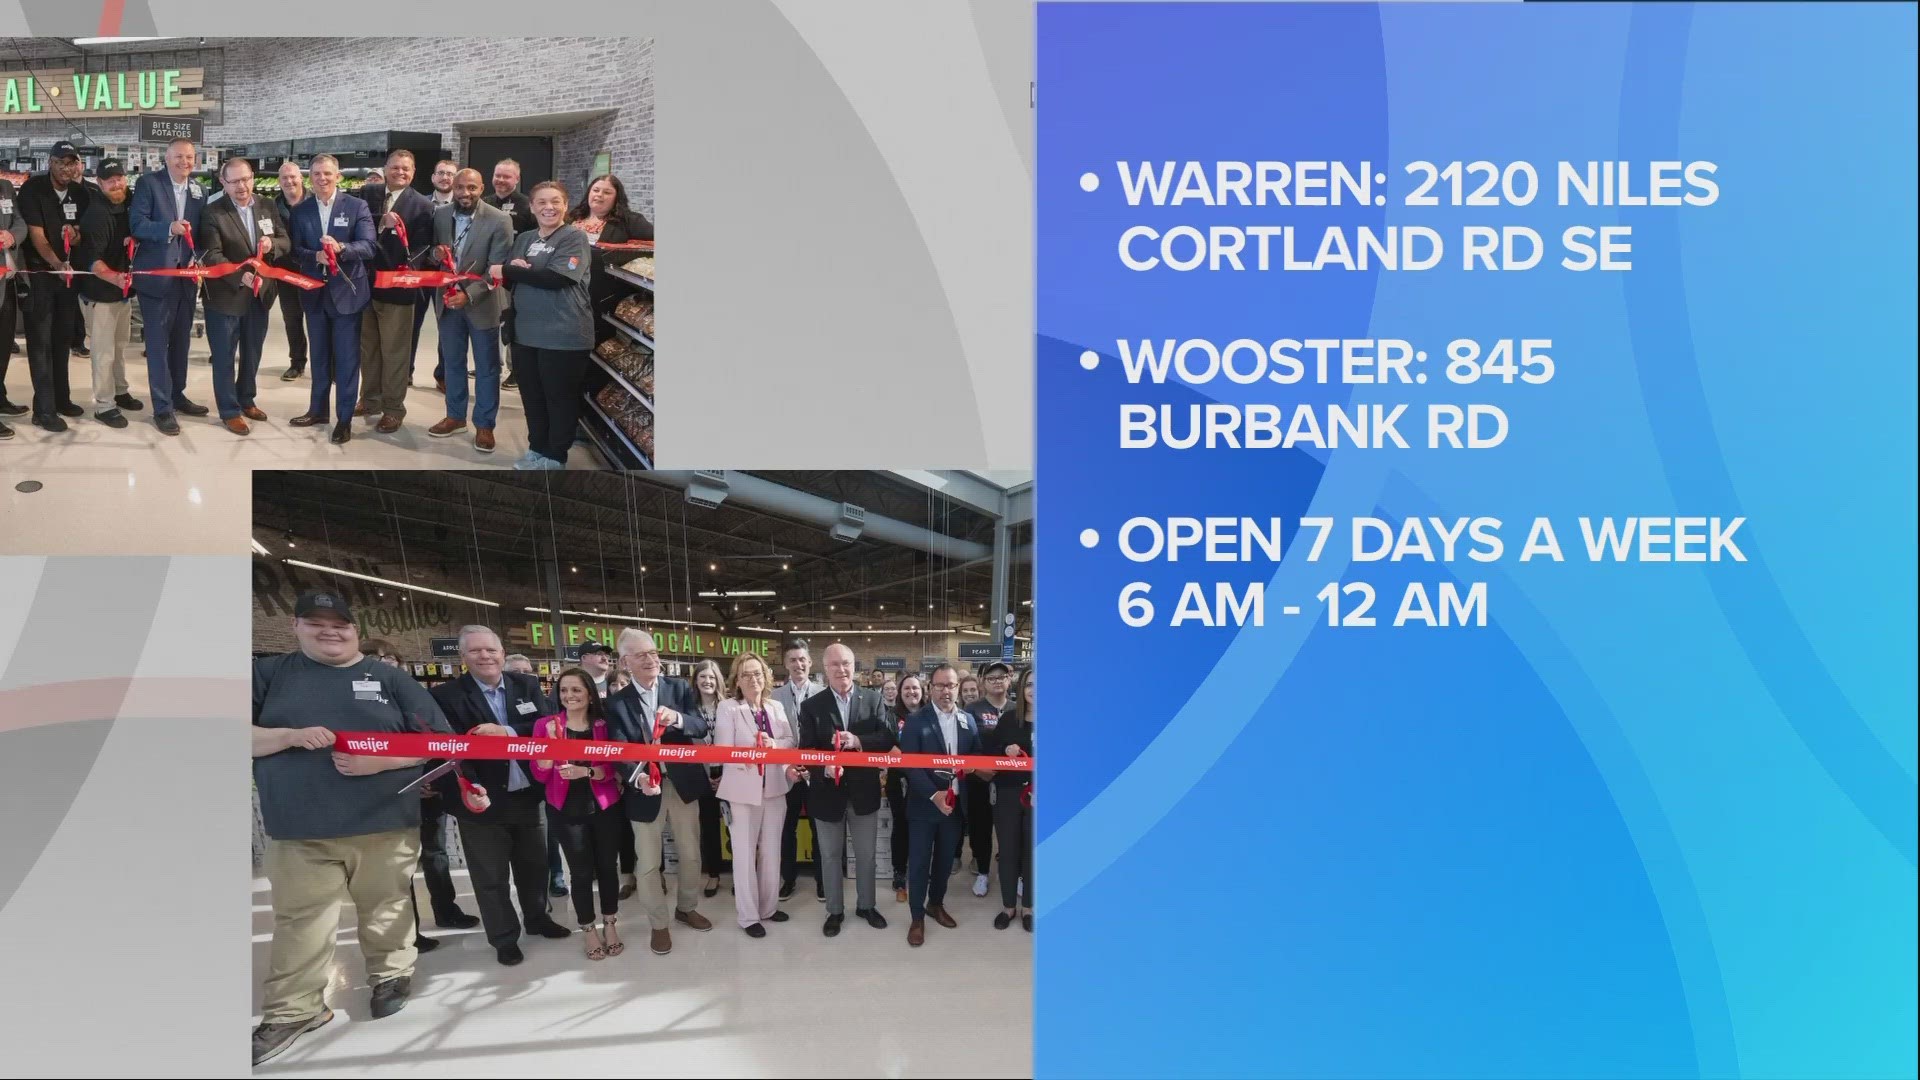 Along with the opening of both locations, Meijer also announced a $25,000 investment in both communities.